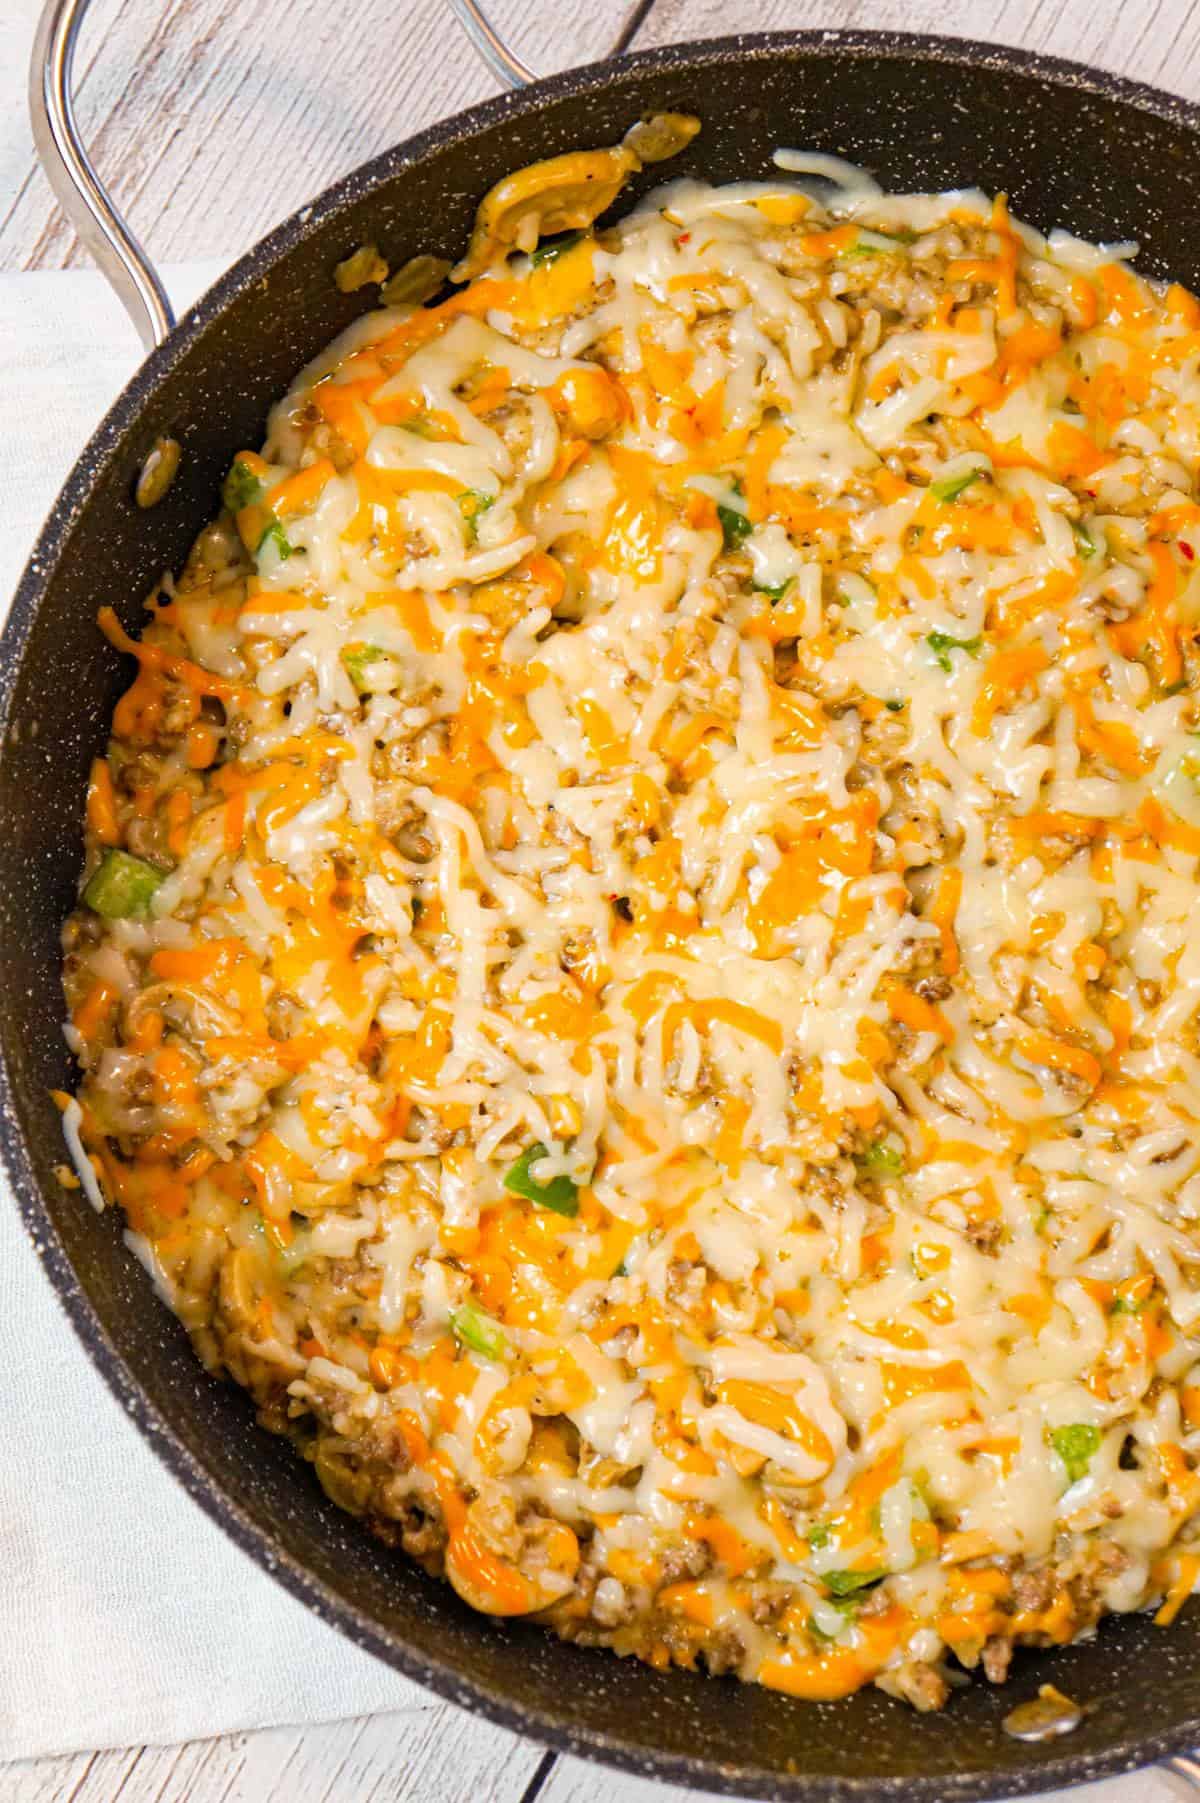 One Pot Philly Cheese Steak Ground Beef and Rice is an easy stove top dinner recipe loaded with hamburger meat, green peppers, sliced mushrooms, instant rice, cream of mushroom soup and shredded cheese.